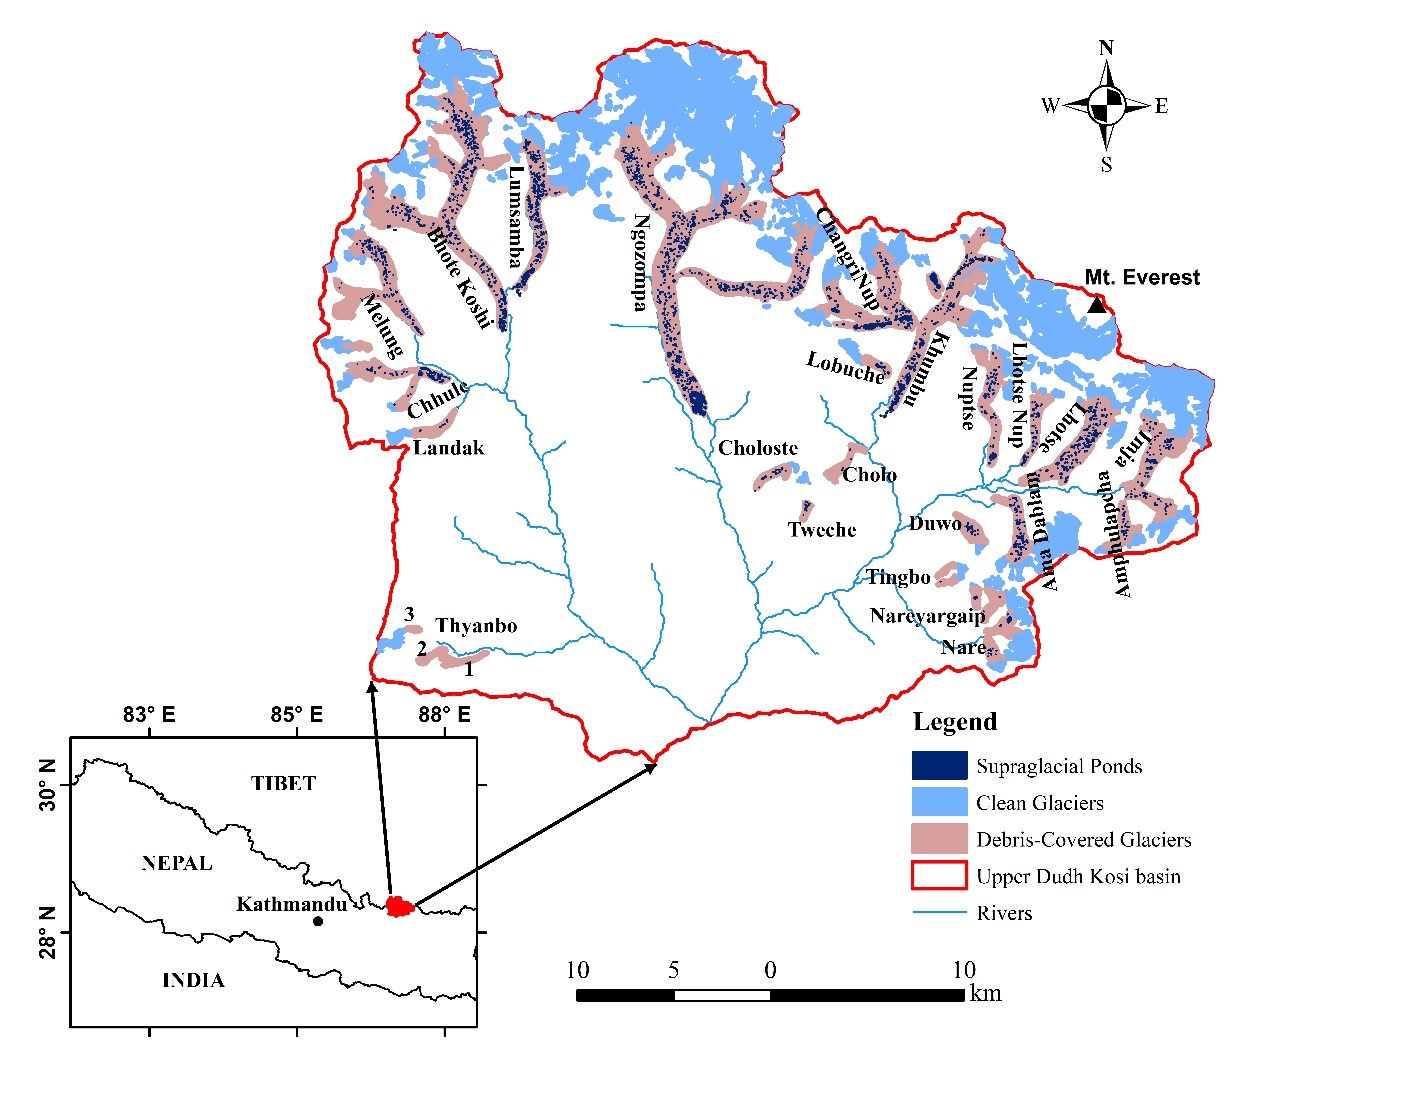 Map of Glacial Lakes and Ponds Using Satellite Imagery